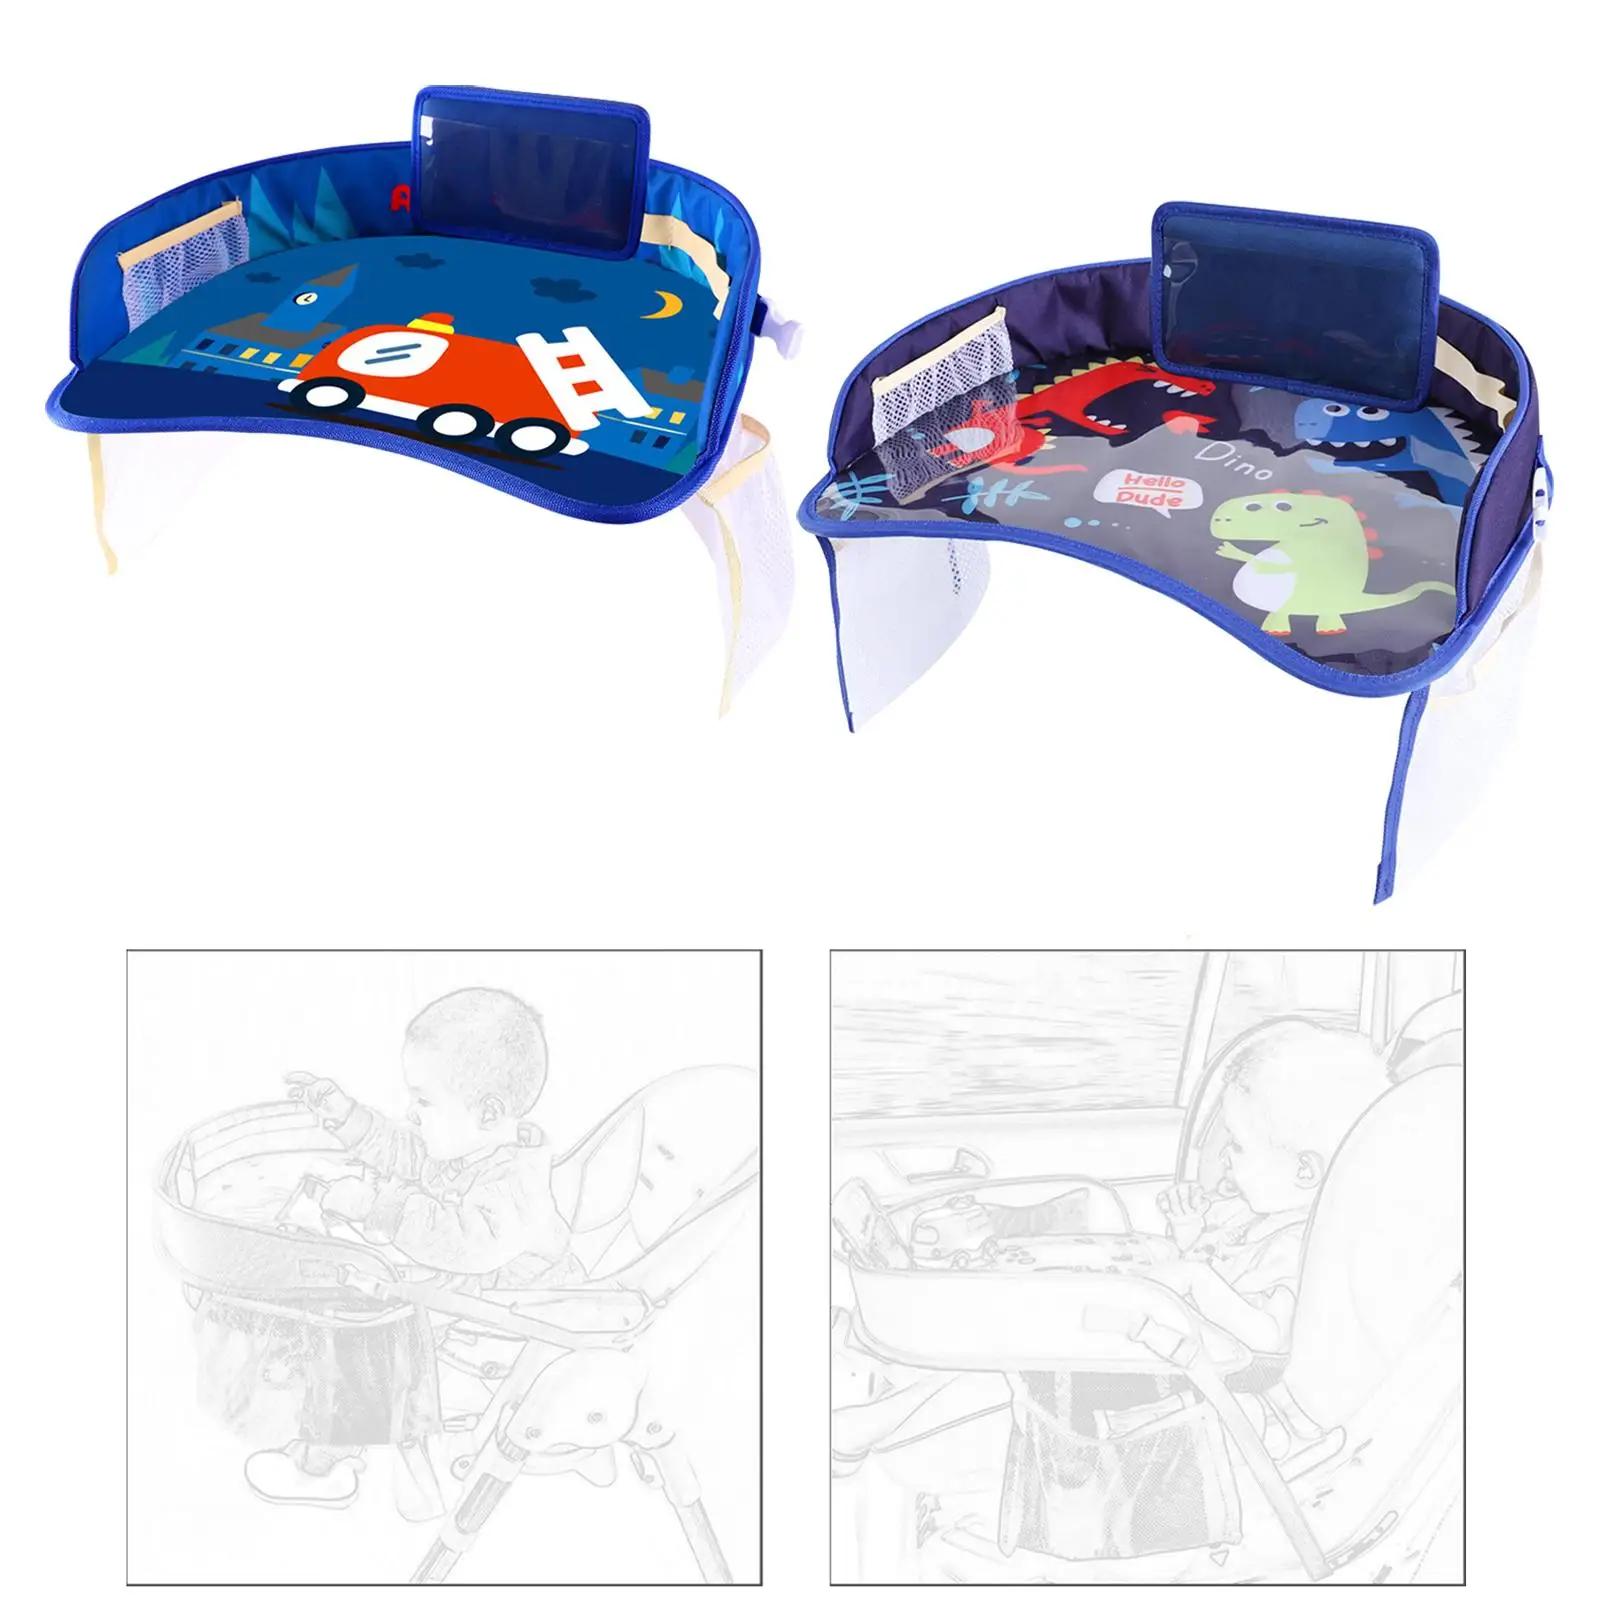 Child Lap Desk Organizer for Airplane Oxford Cloth Foladable Multipurpose with Mesh Pocket Waterproof Carseat Table Top Tary